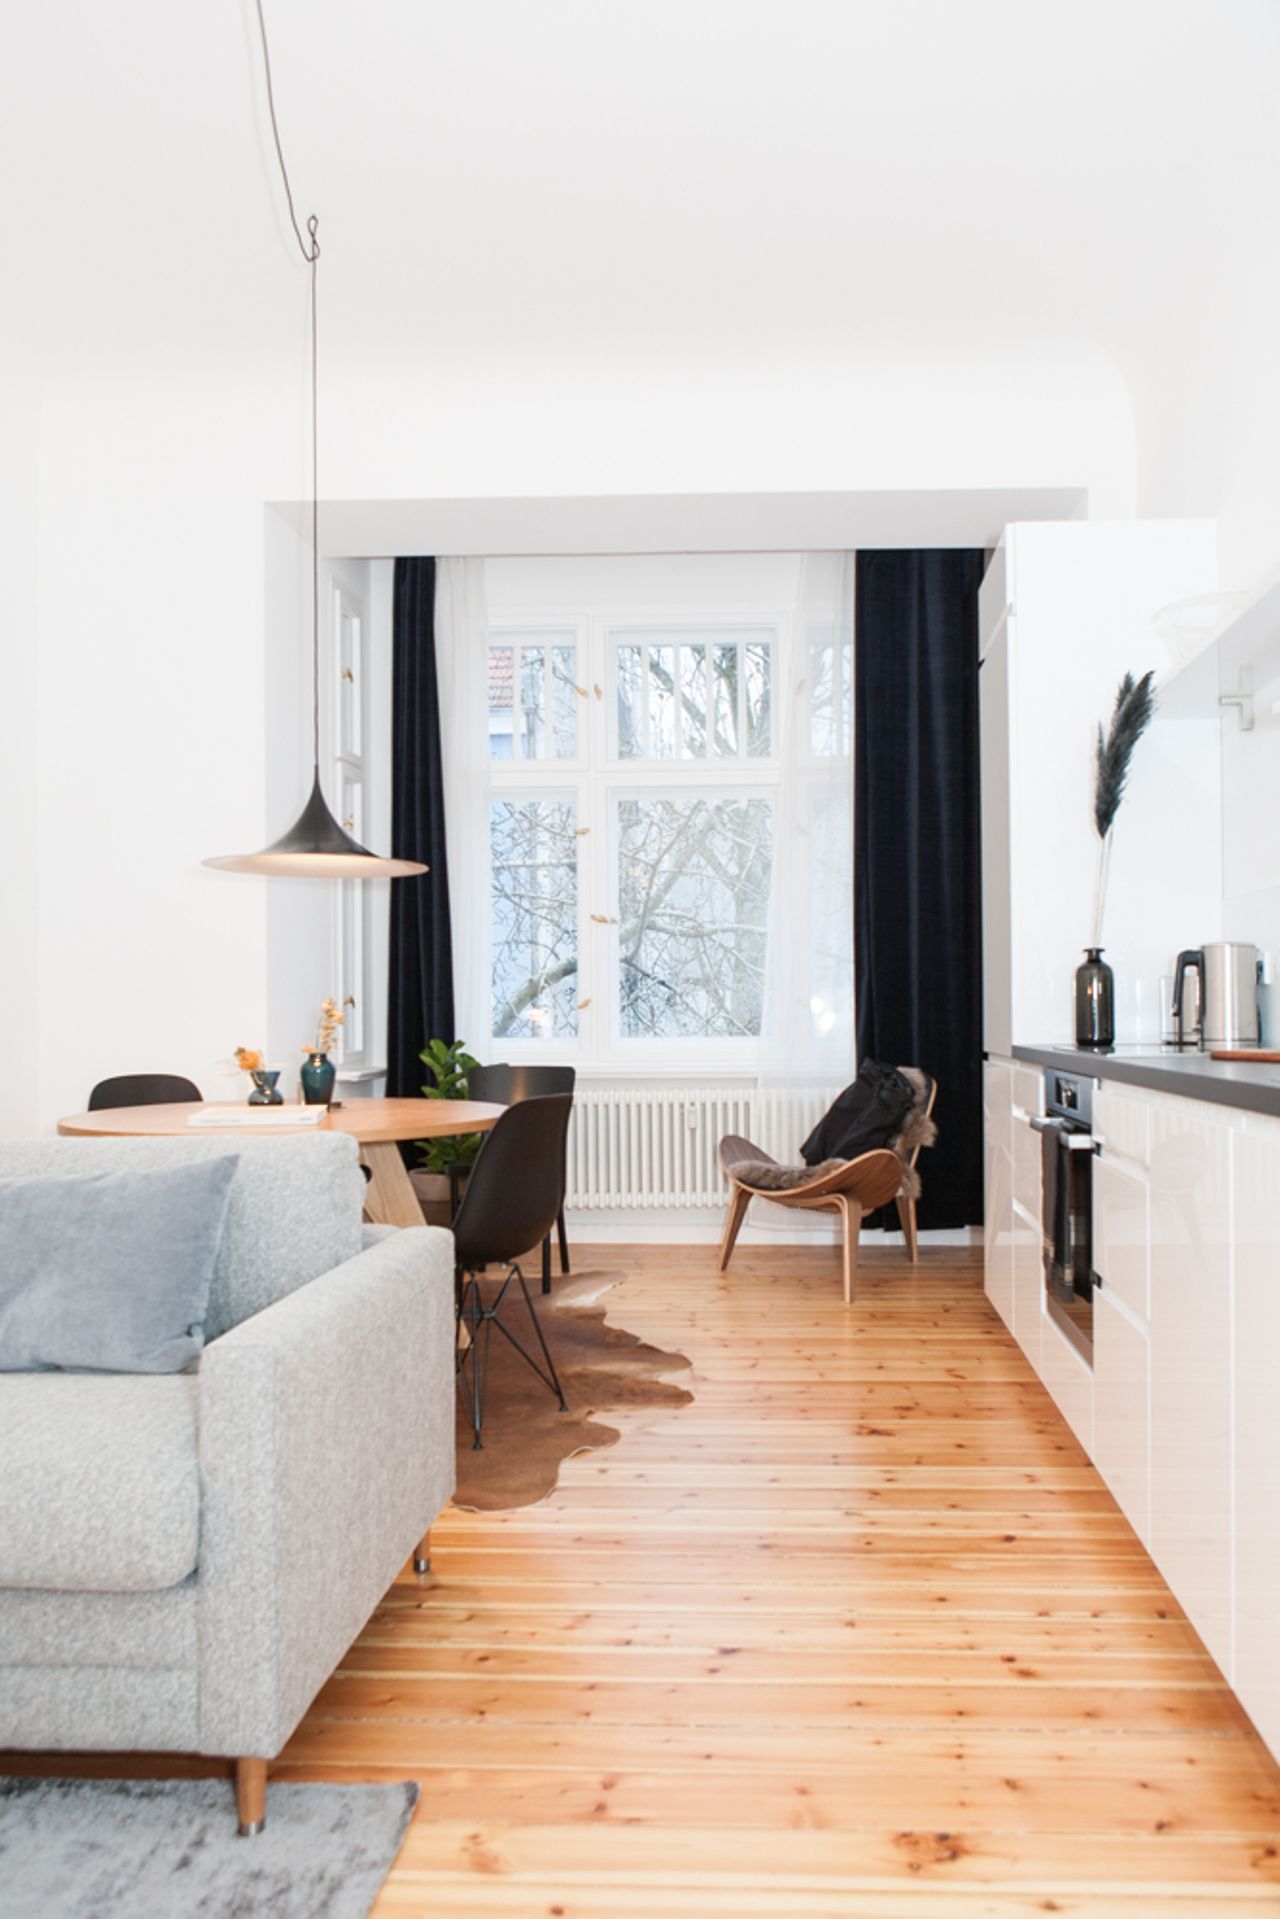 Newly renovated fully furnished and equipped designer’s apartment on the best location in Kreuzberg- on the canal of Paul Linke Ufer